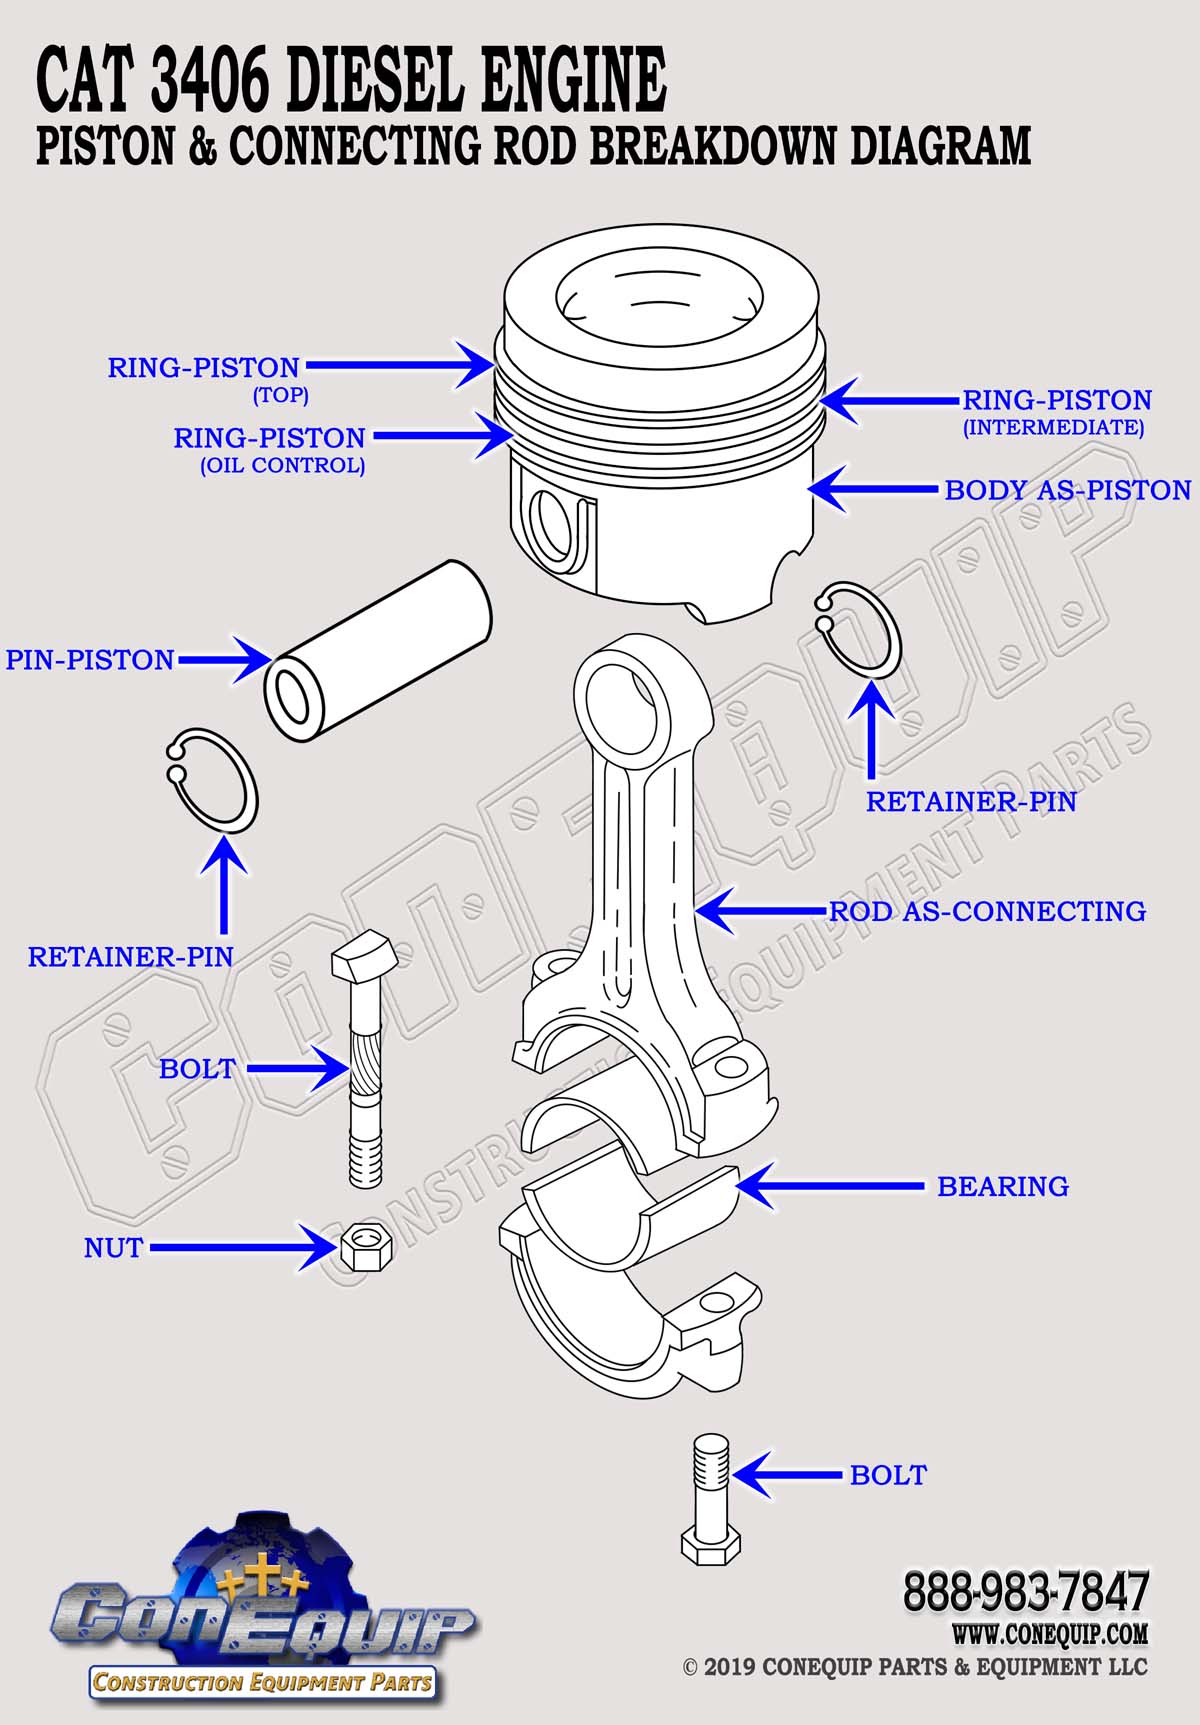 CAT 3406 piston connecting rod assembly